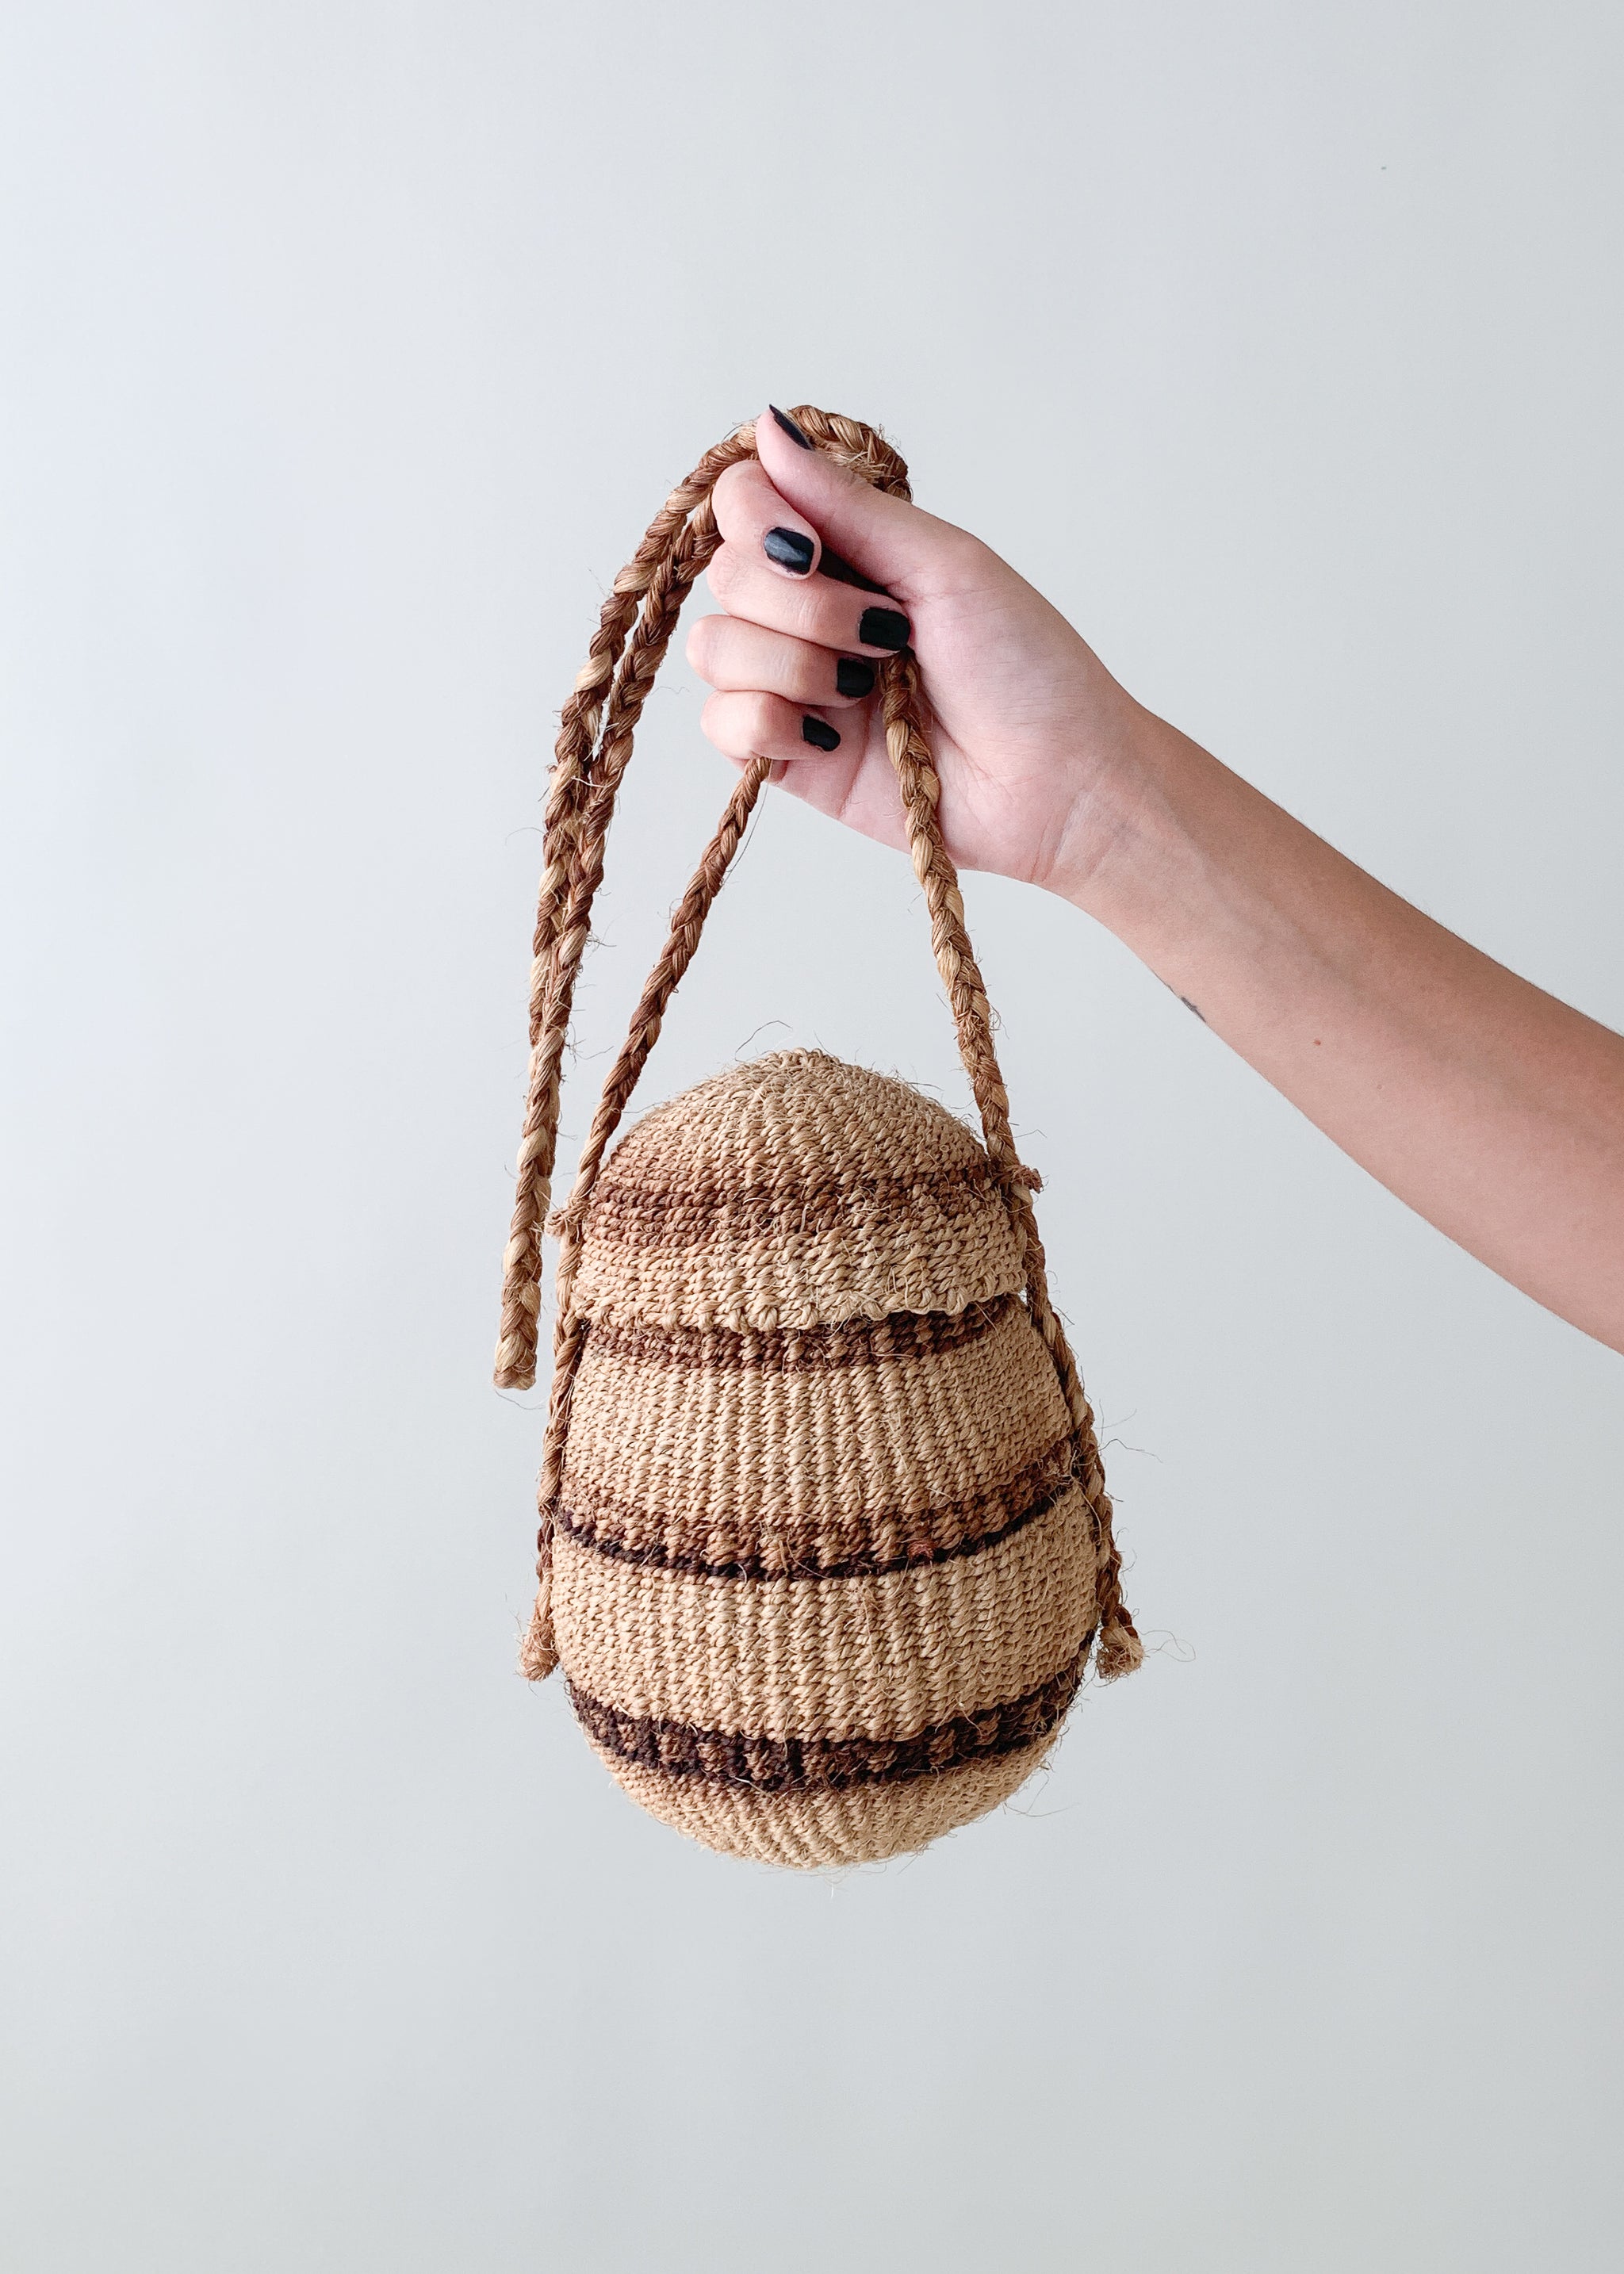 Amazon.com: Straw Bag Round Summer Straw Large Woven Beach Bag Purse For  Women Vocation Tote Handbags With Pom Poms : Clothing, Shoes & Jewelry